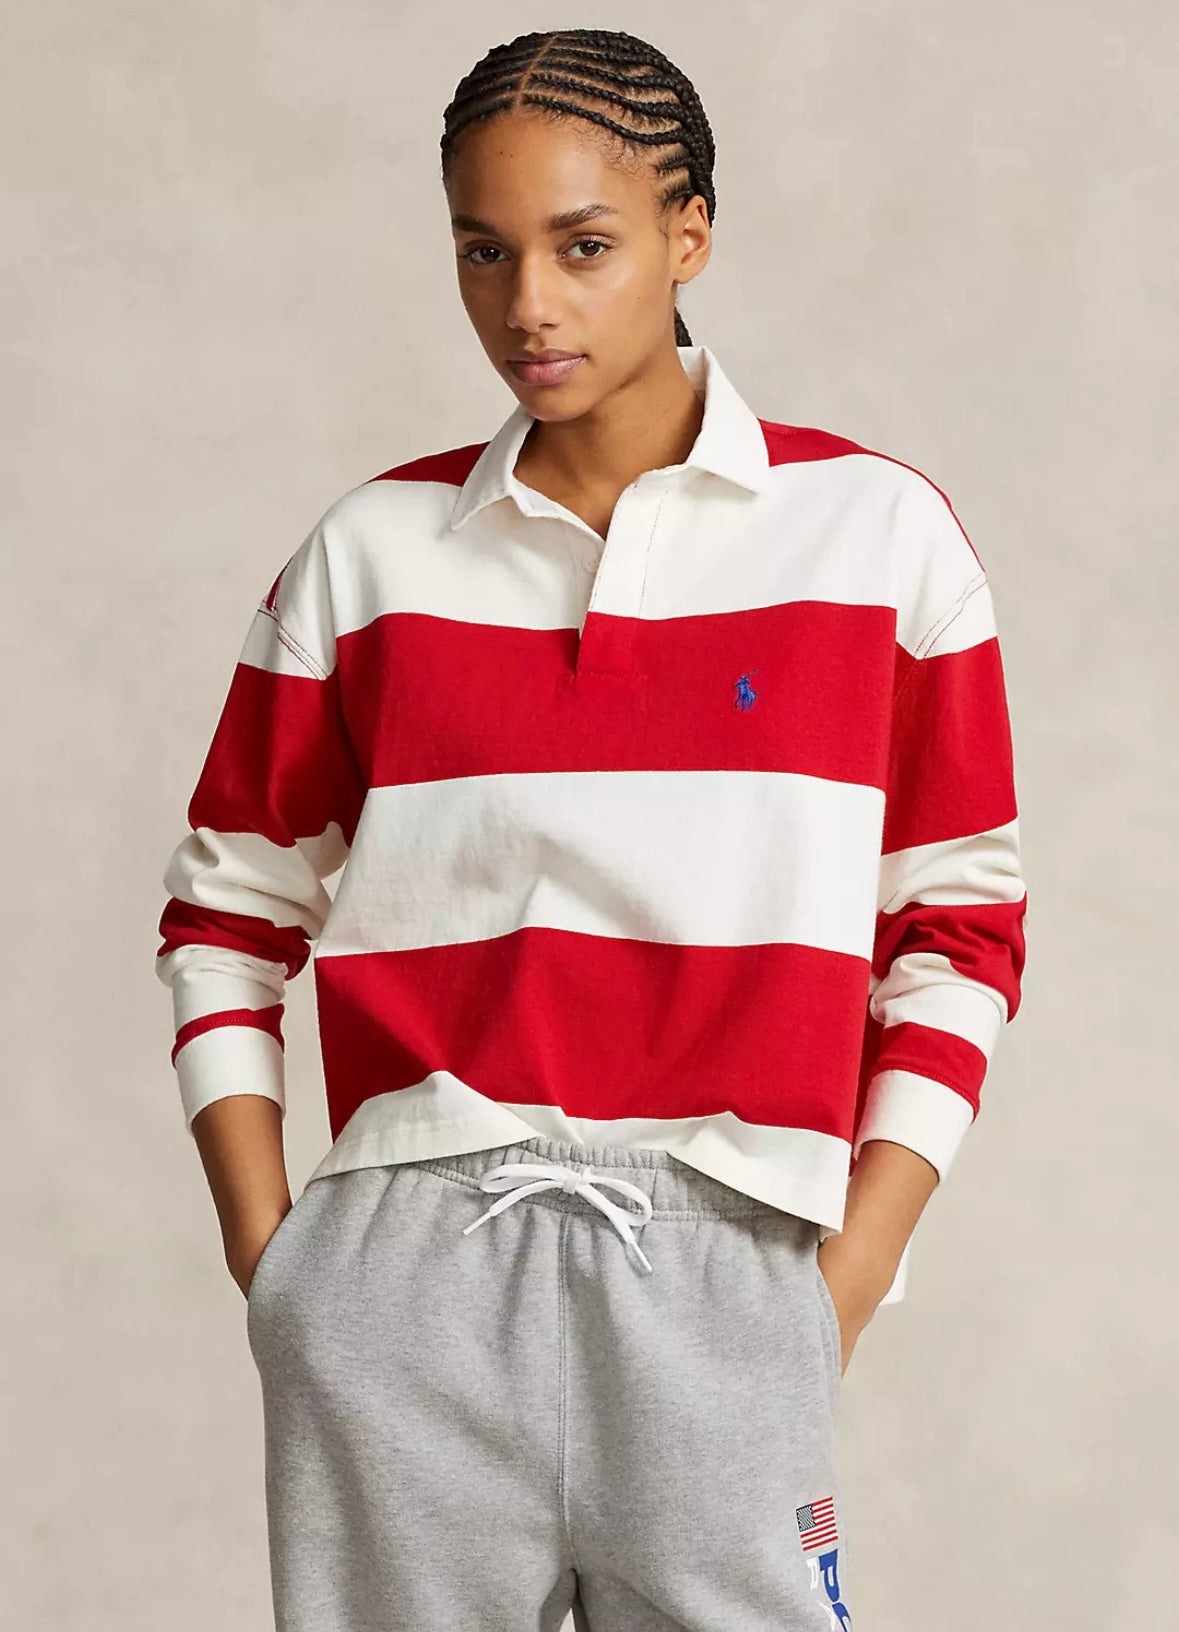 Polo Ralph Lauren Rugby - Red/White